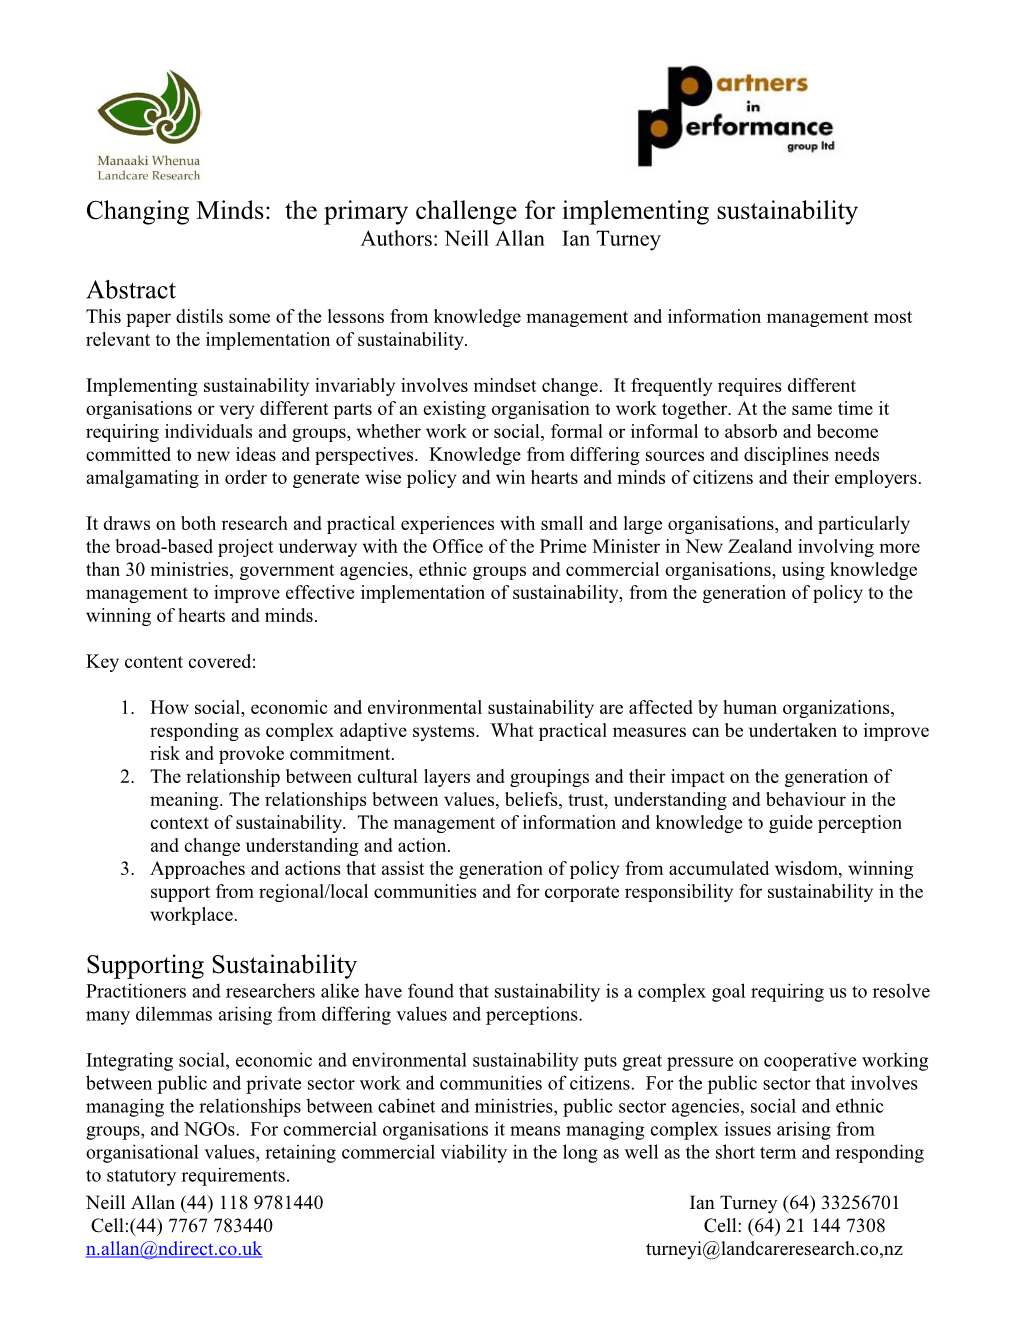 Changing Minds: the Primary Challenge for Implementing Sustainability ENCOS 2004 03-04-04